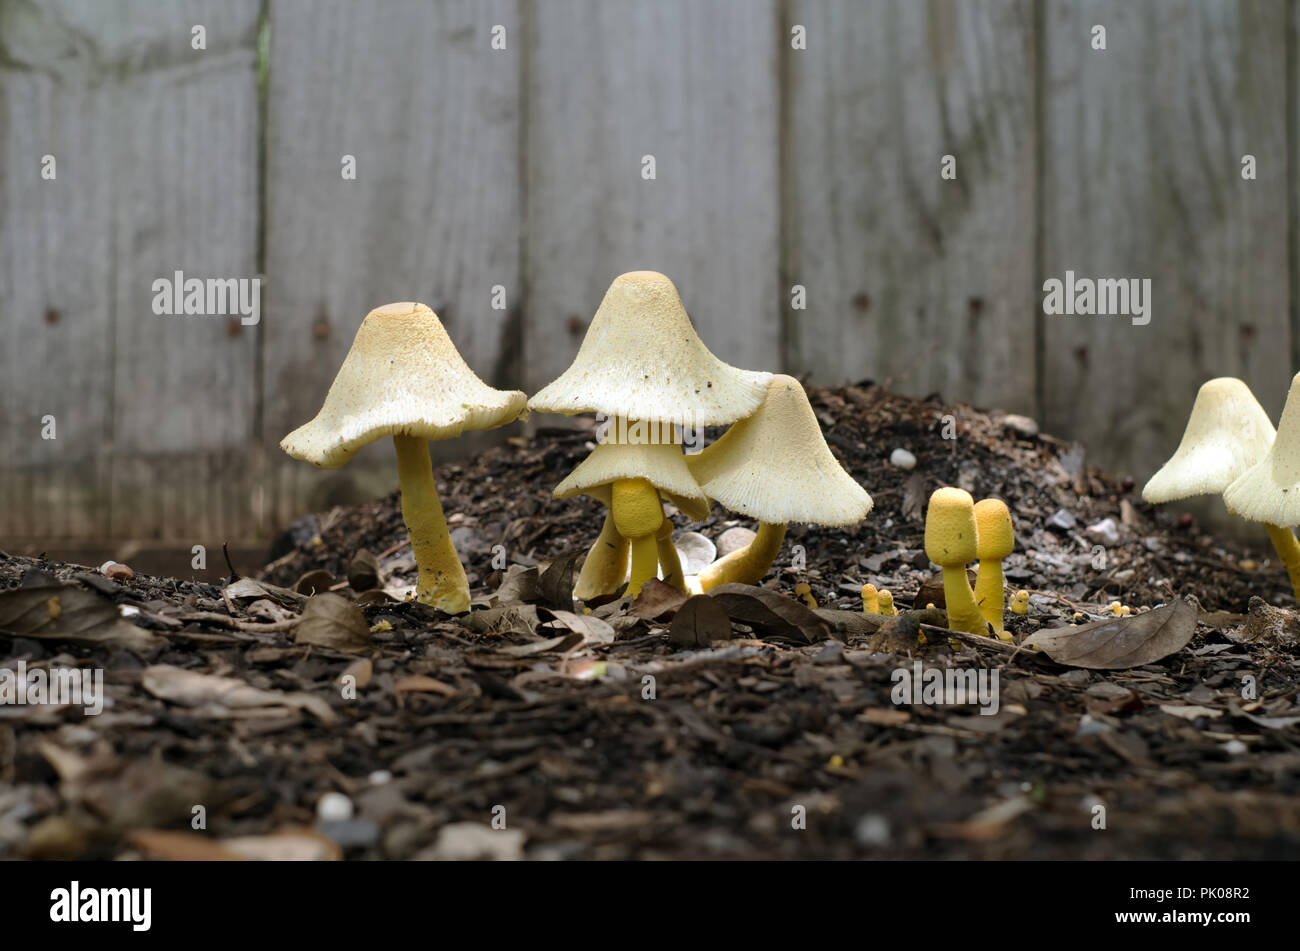 Mushrooms In Varying Stages Grow In Garden Soil Stock Photo